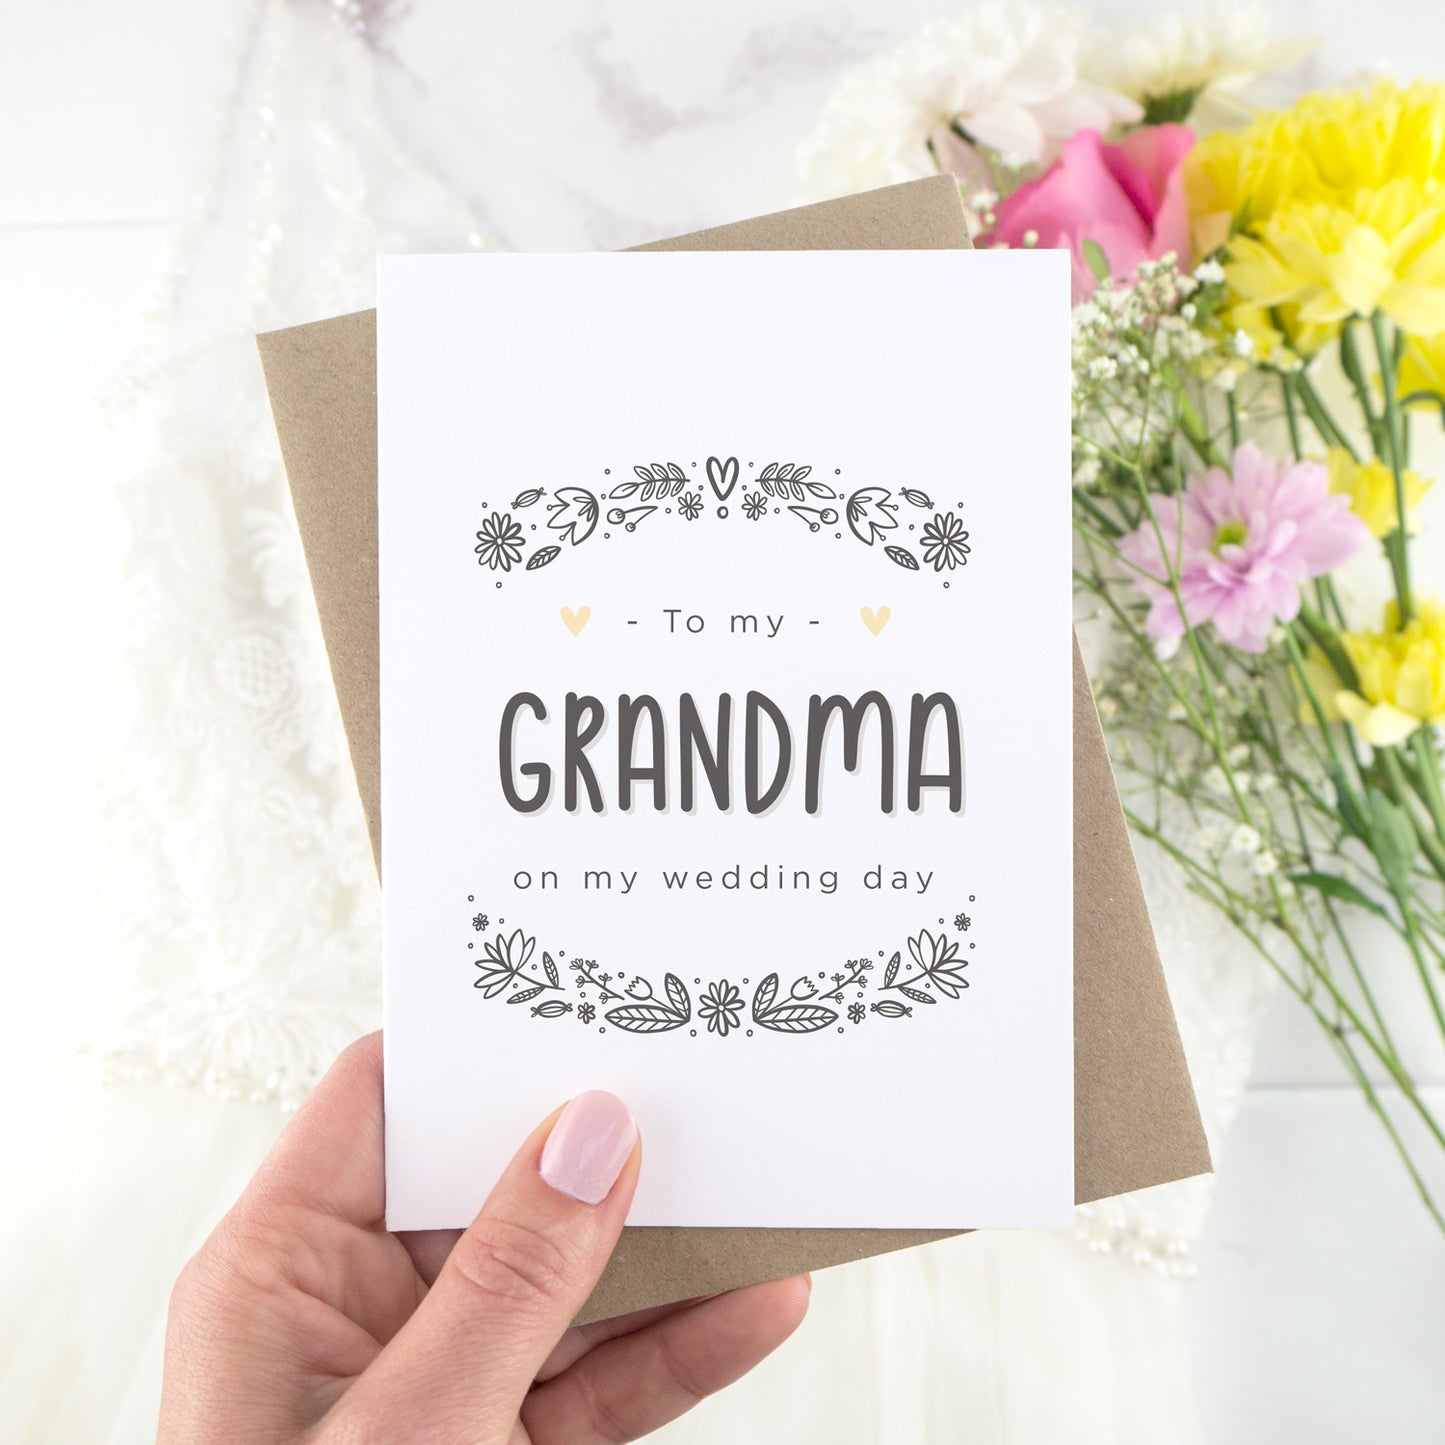 To my grandma on my wedding day. A white card with grey hand drawn lettering, and a grey floral border. The image features a wedding dress and bouquet of flowers.